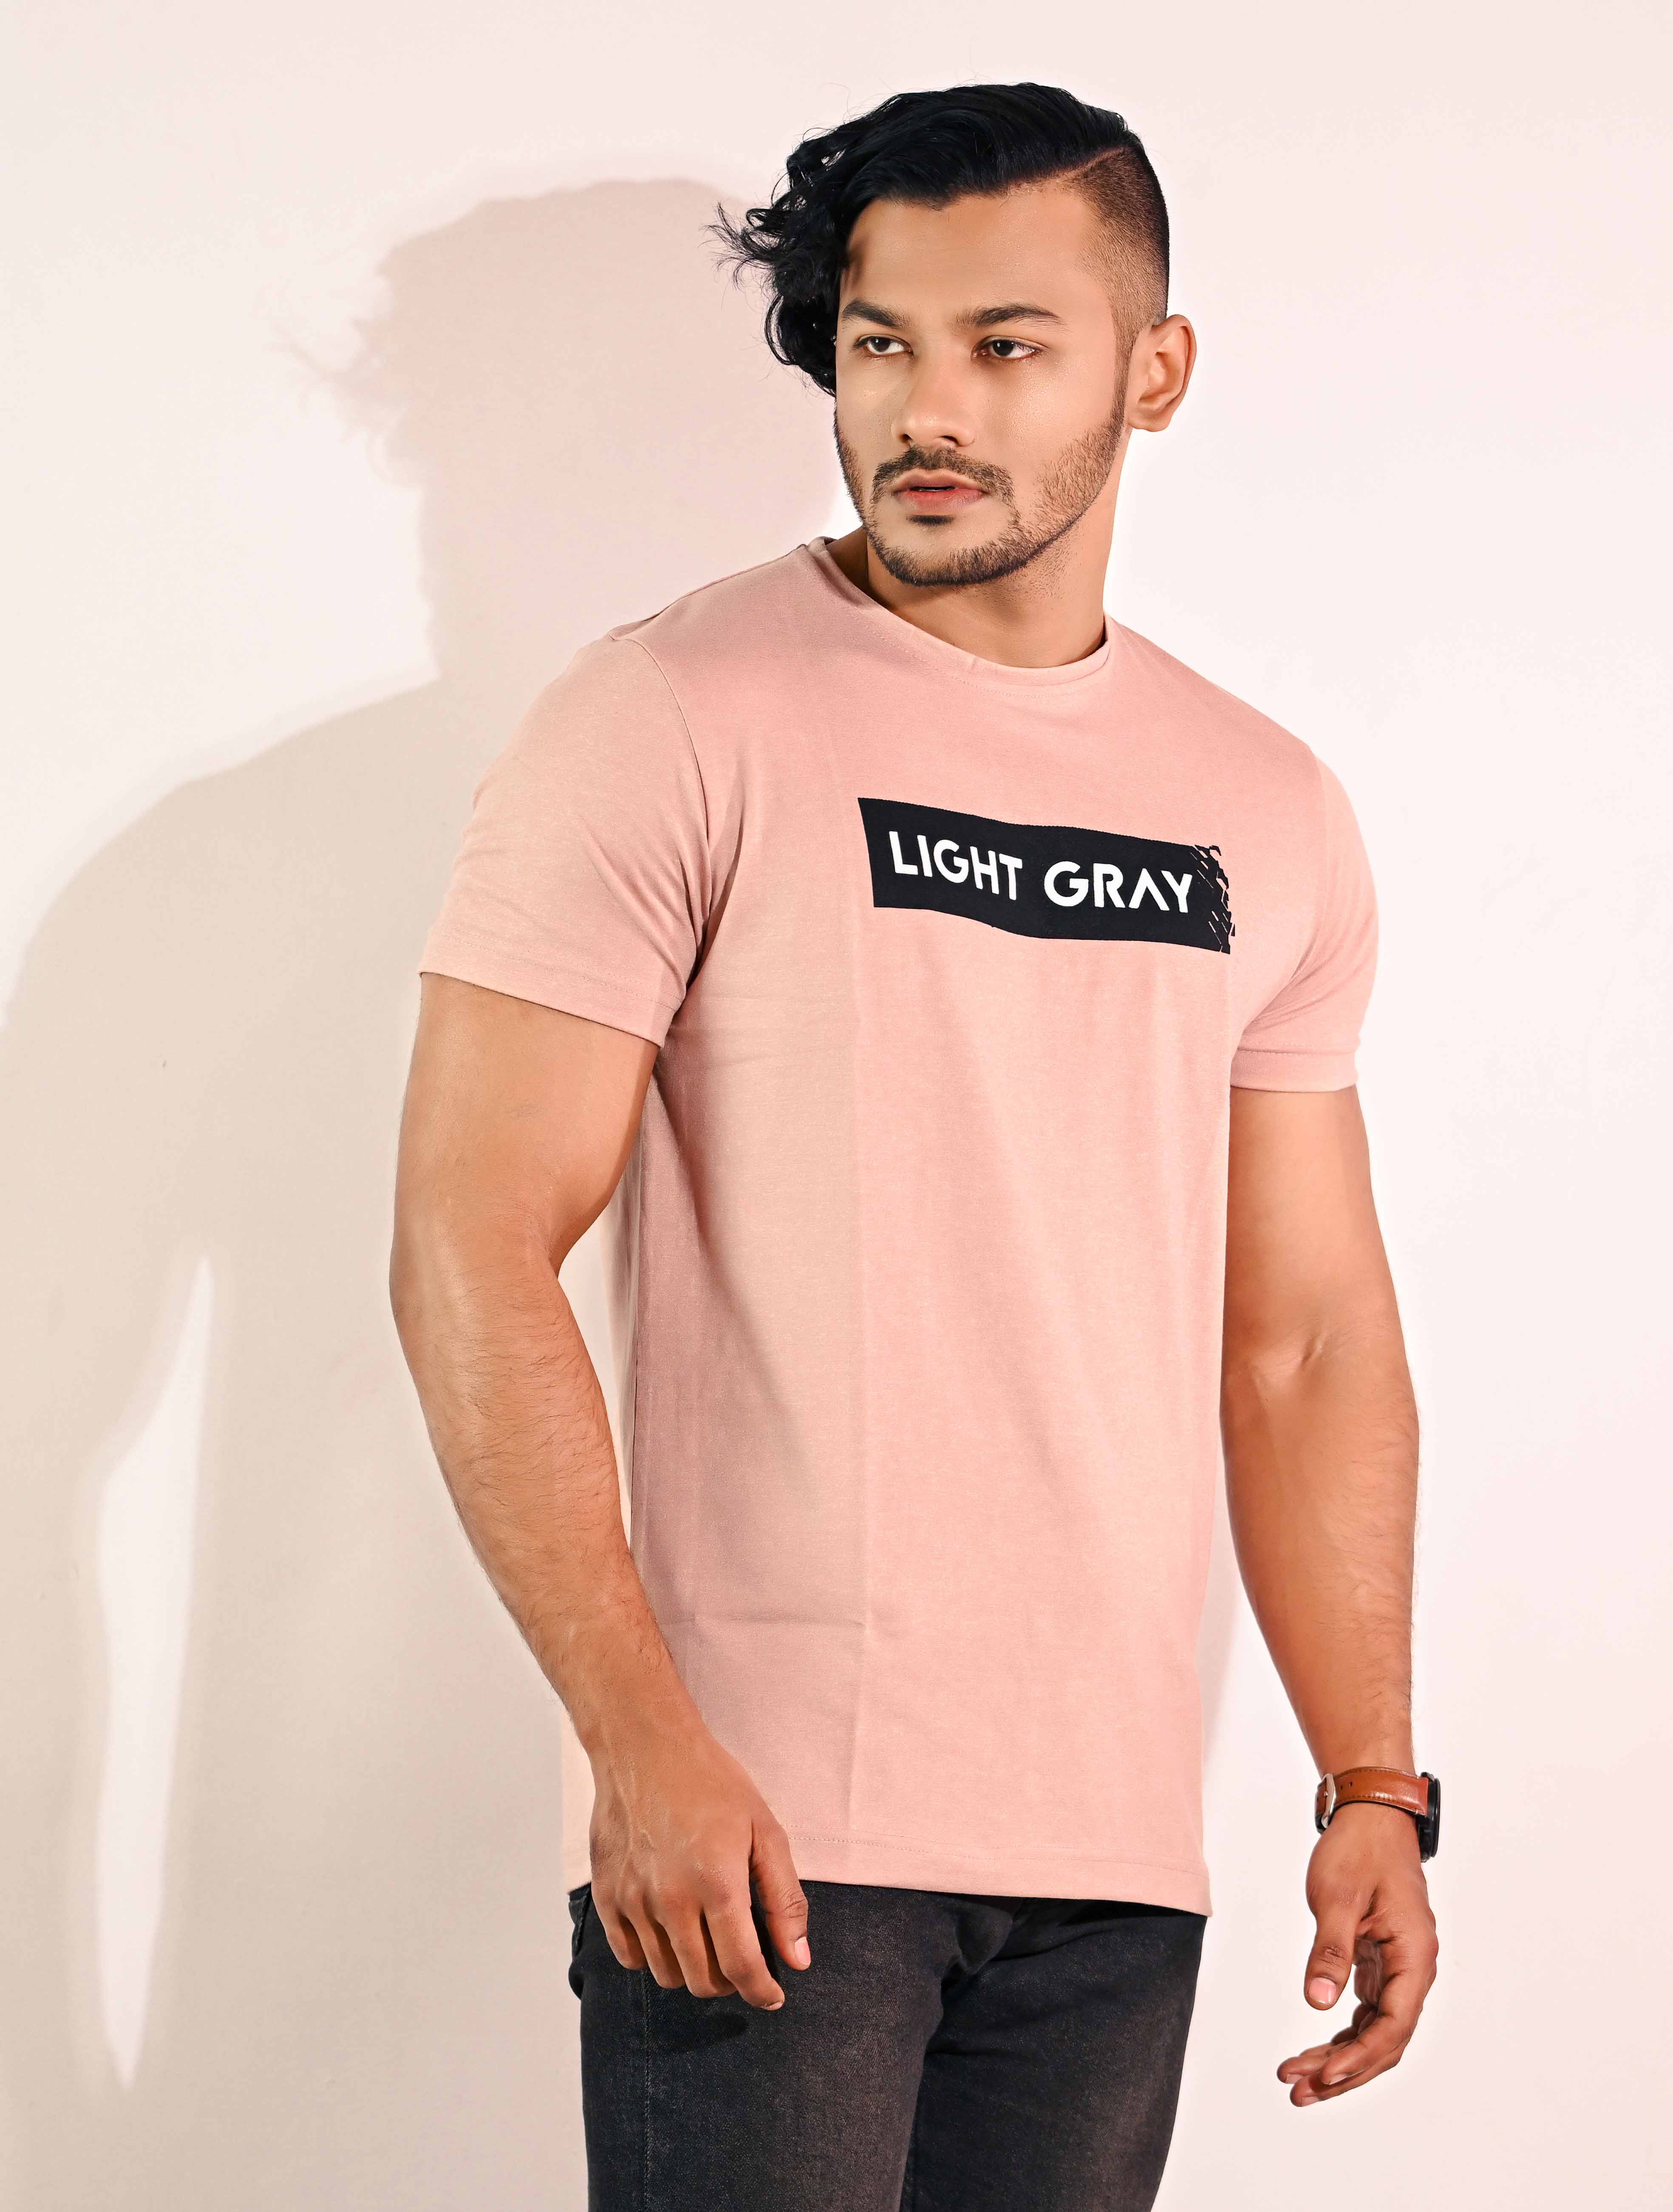 Comfy Cotton Short Sleeve Tee for Men